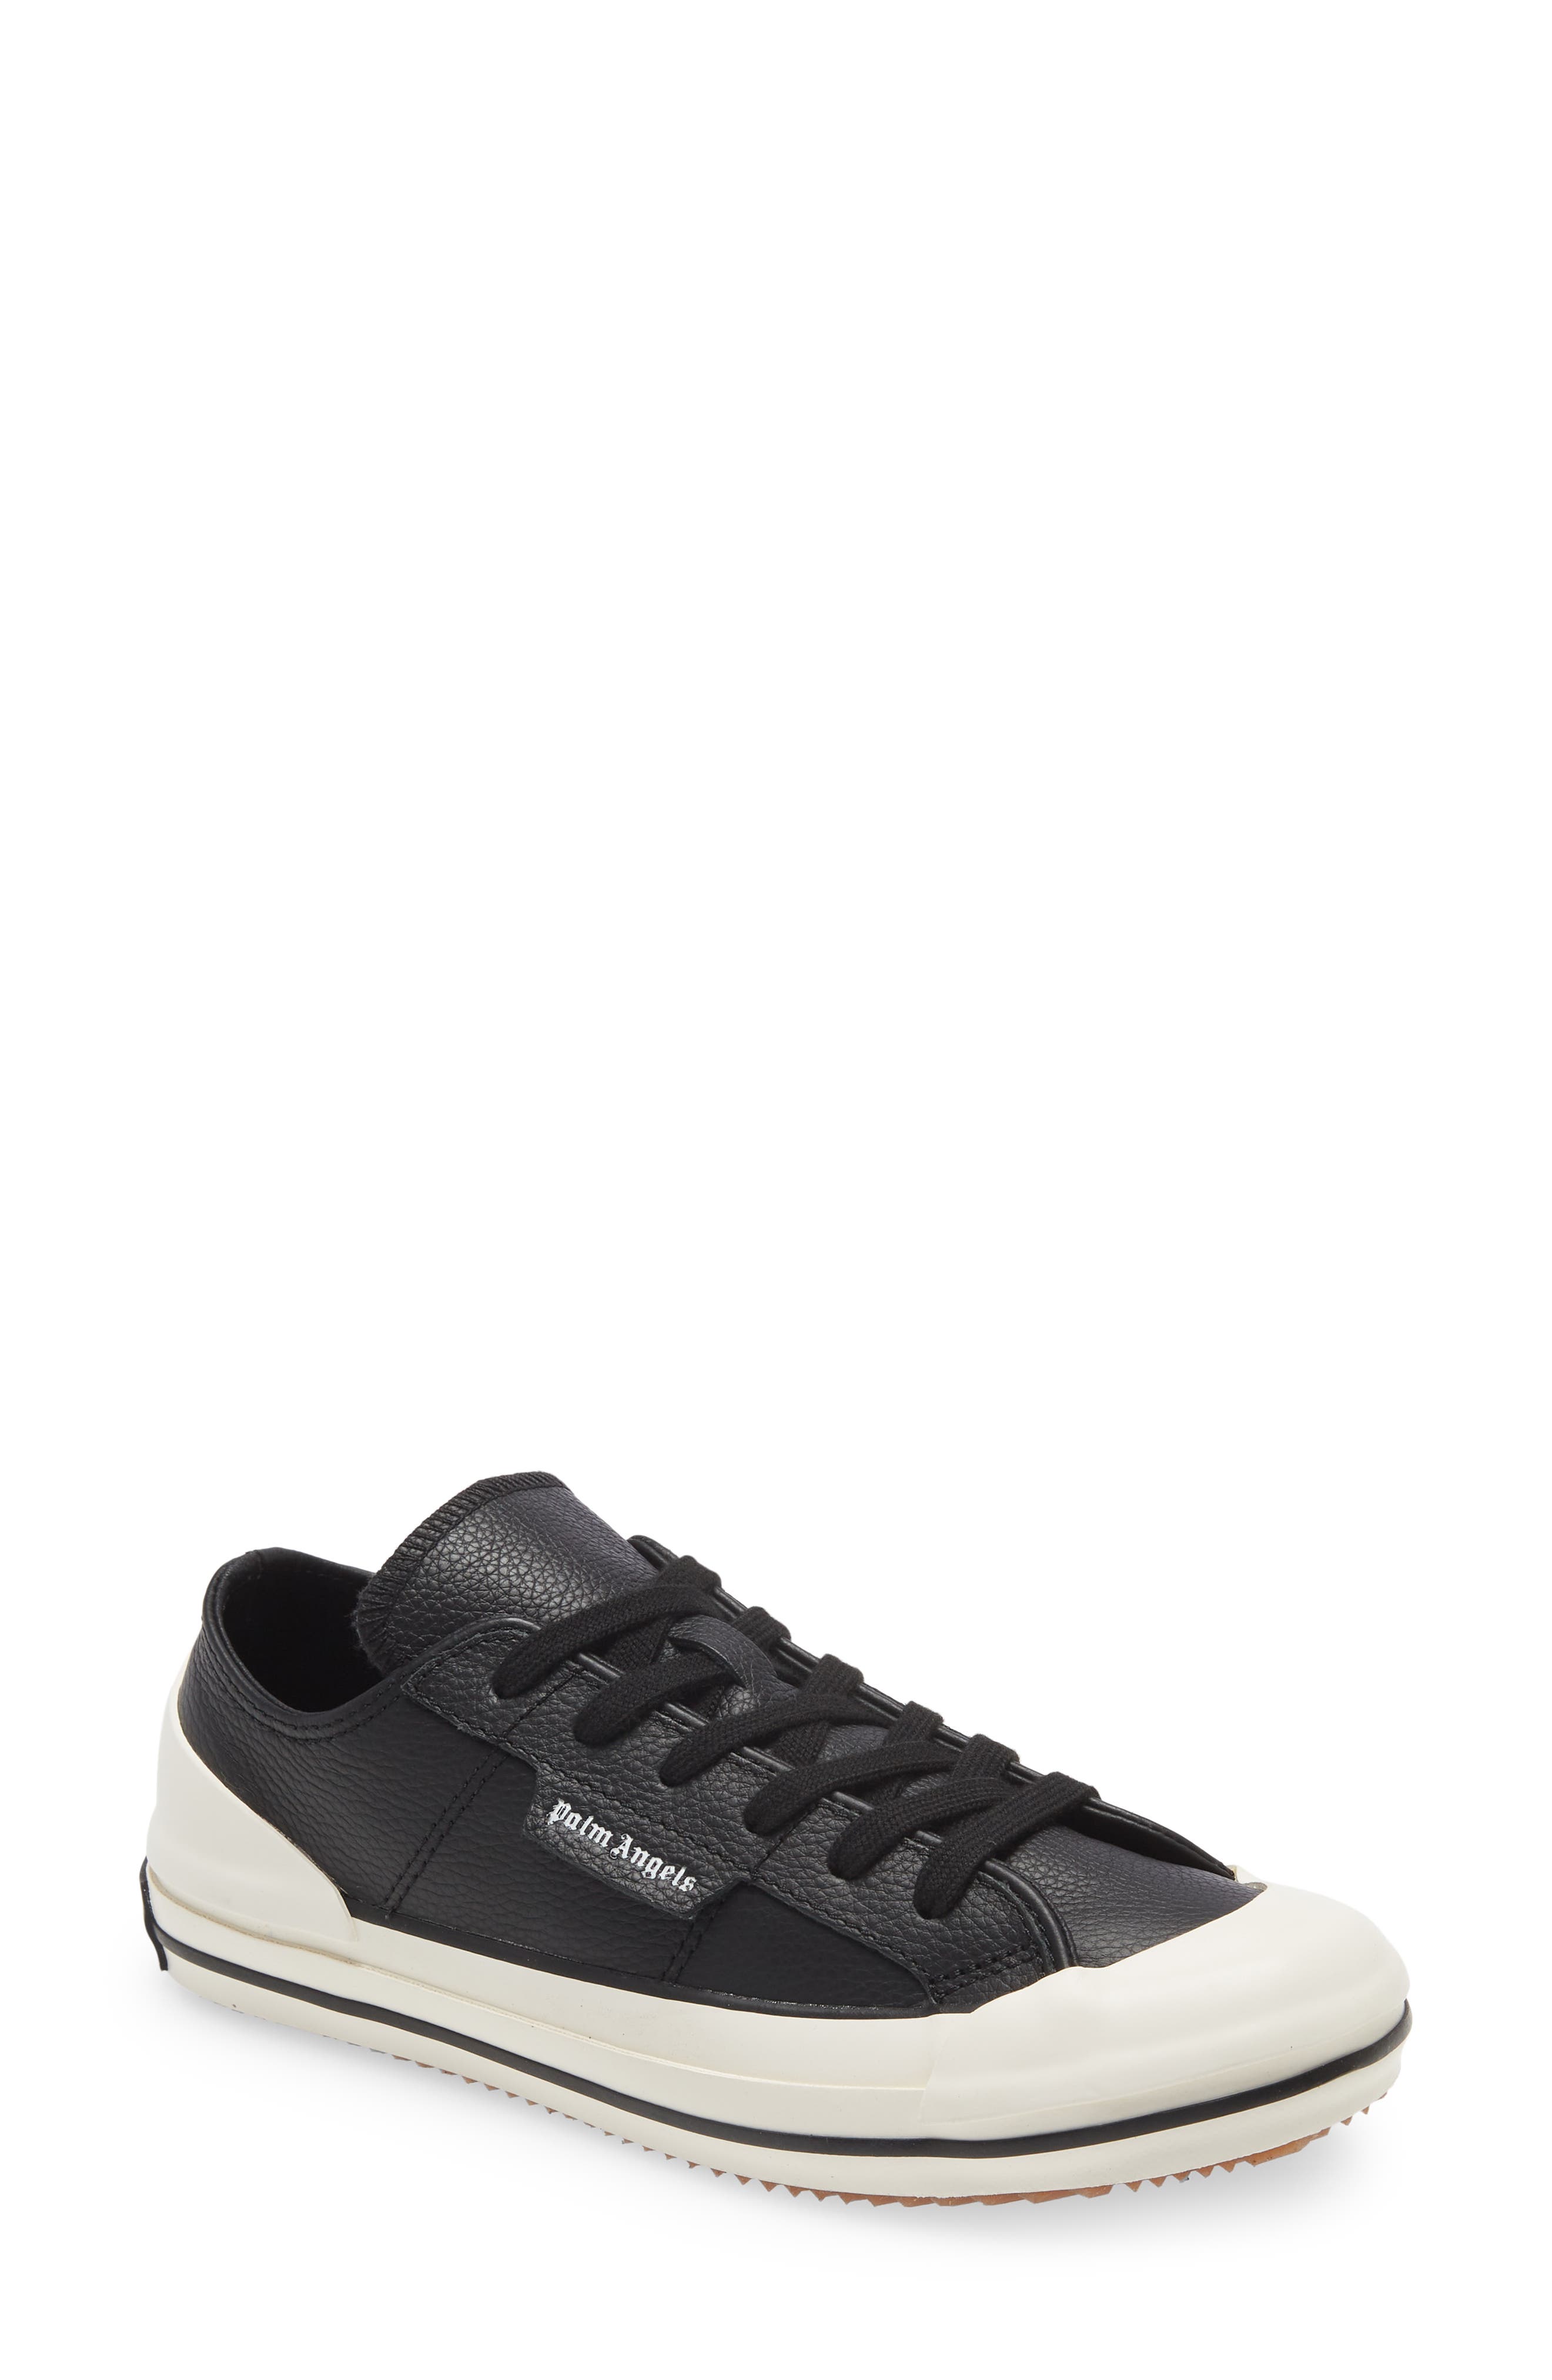 Palm Angels Low Top Sneaker in Black/White at Nordstrom, Size 5Us